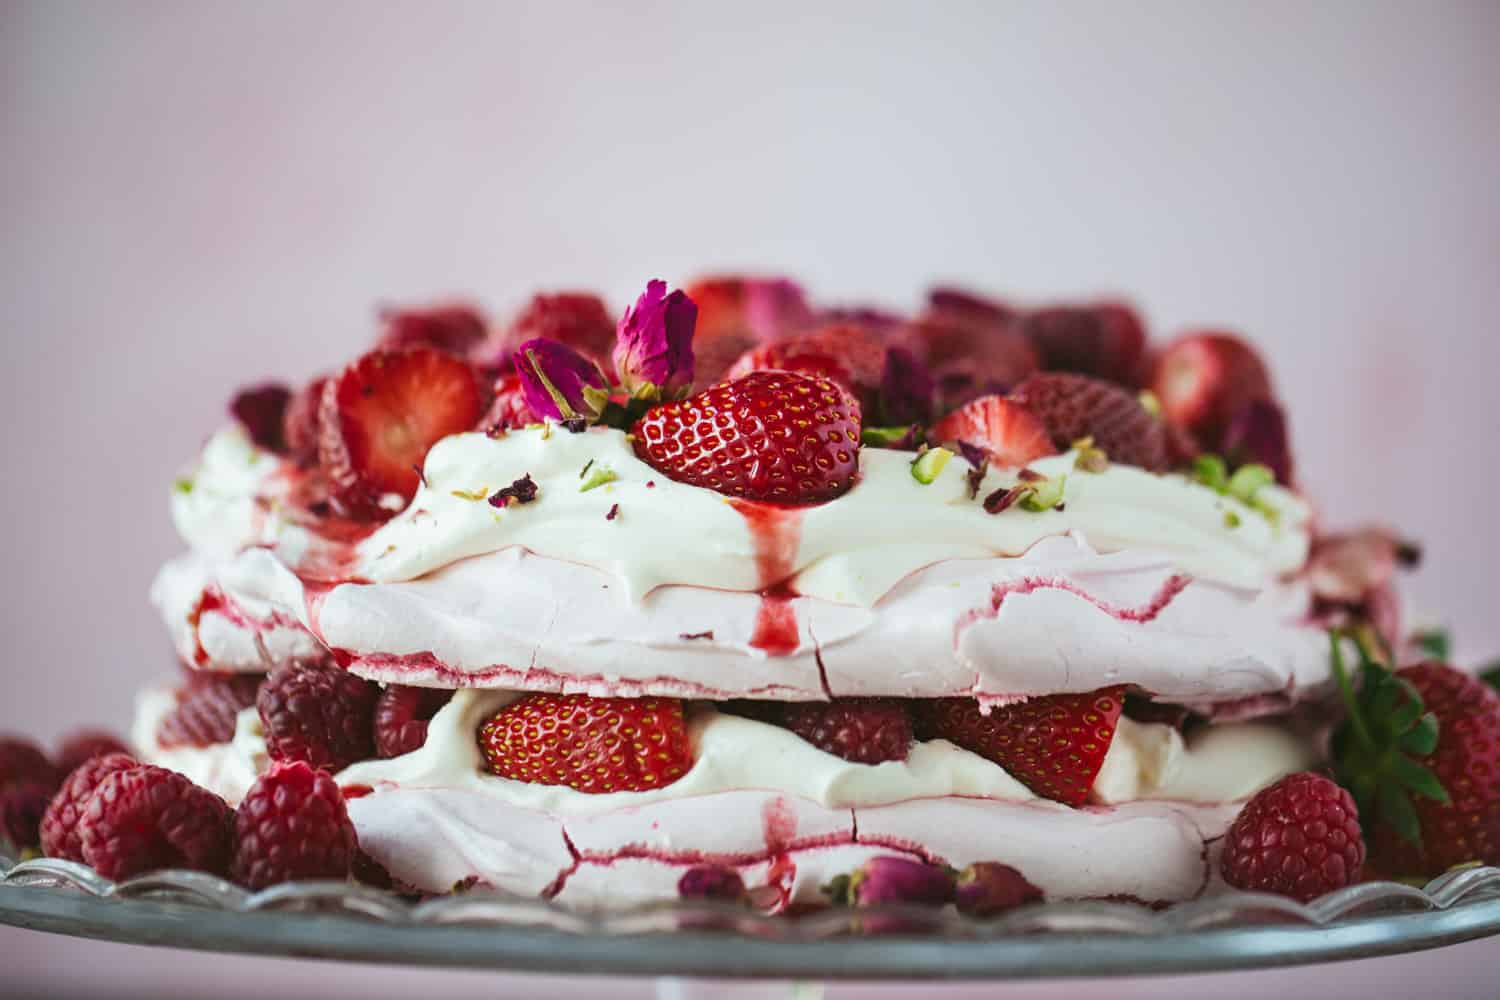 Side view of a summer berry pavlova